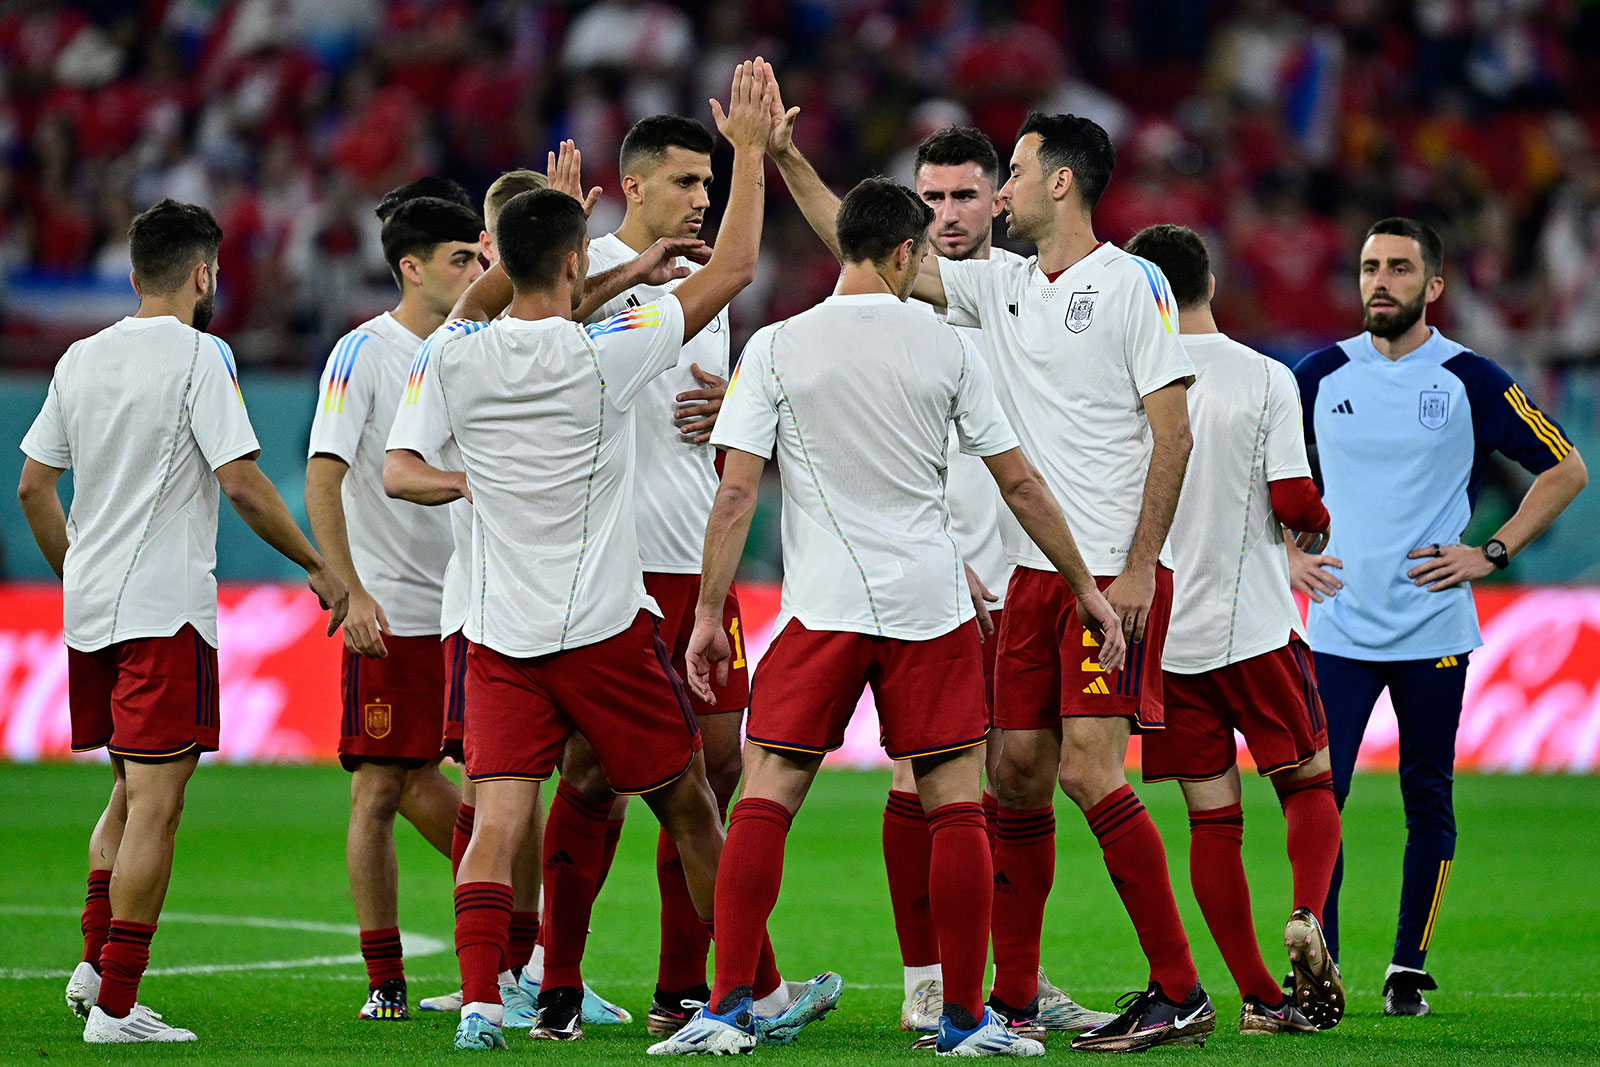 Spain players prepare for their match against Costa Rica on November 23.